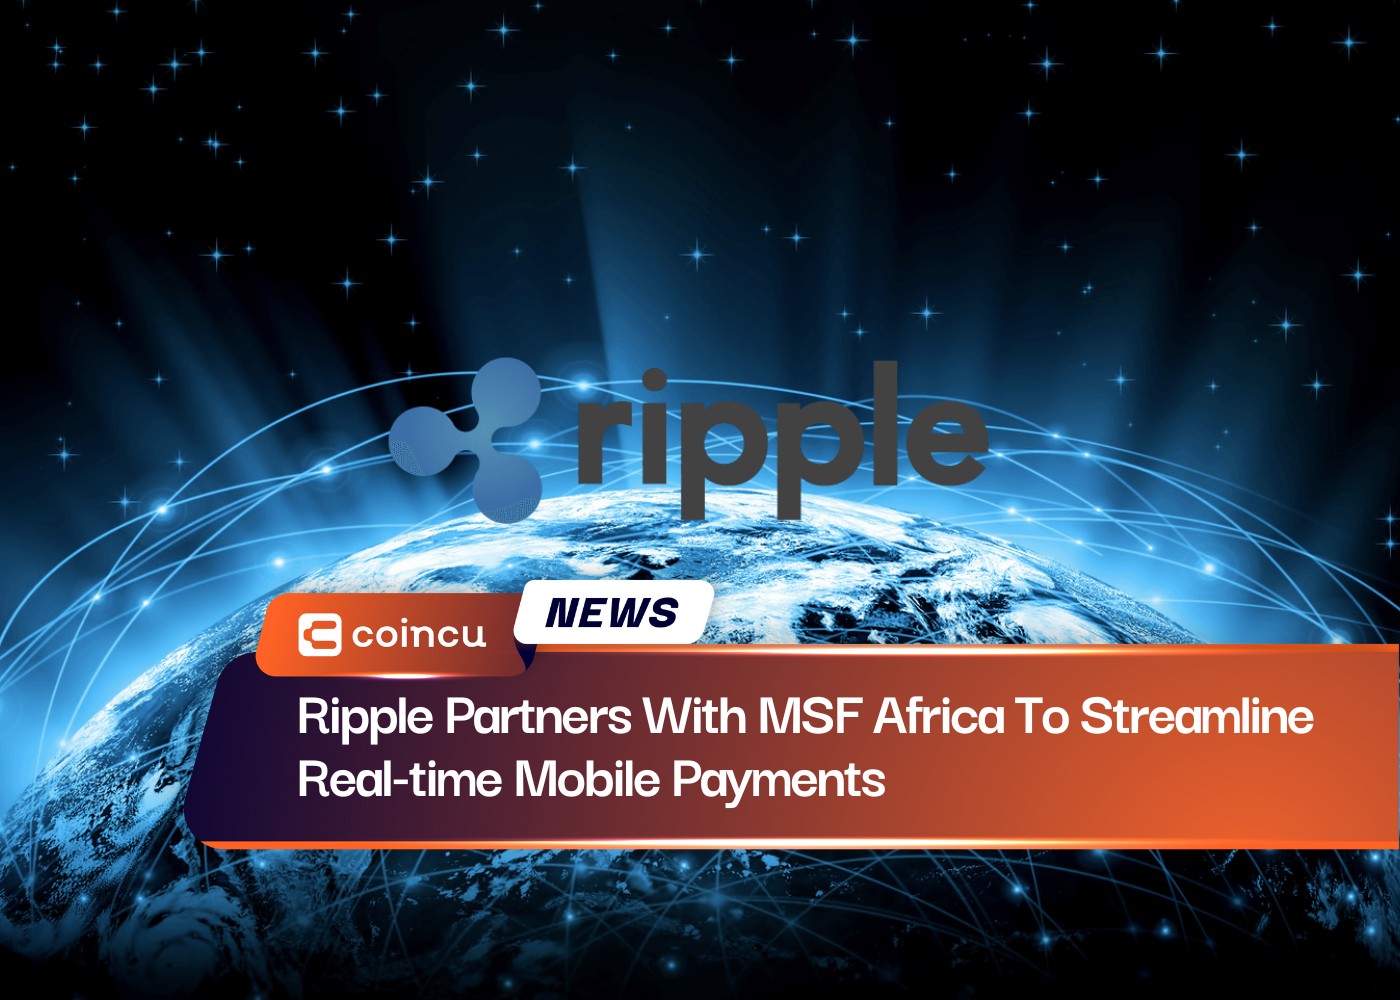 Ripple Partners With MSF Africa To Streamline Real-time Mobile Payments